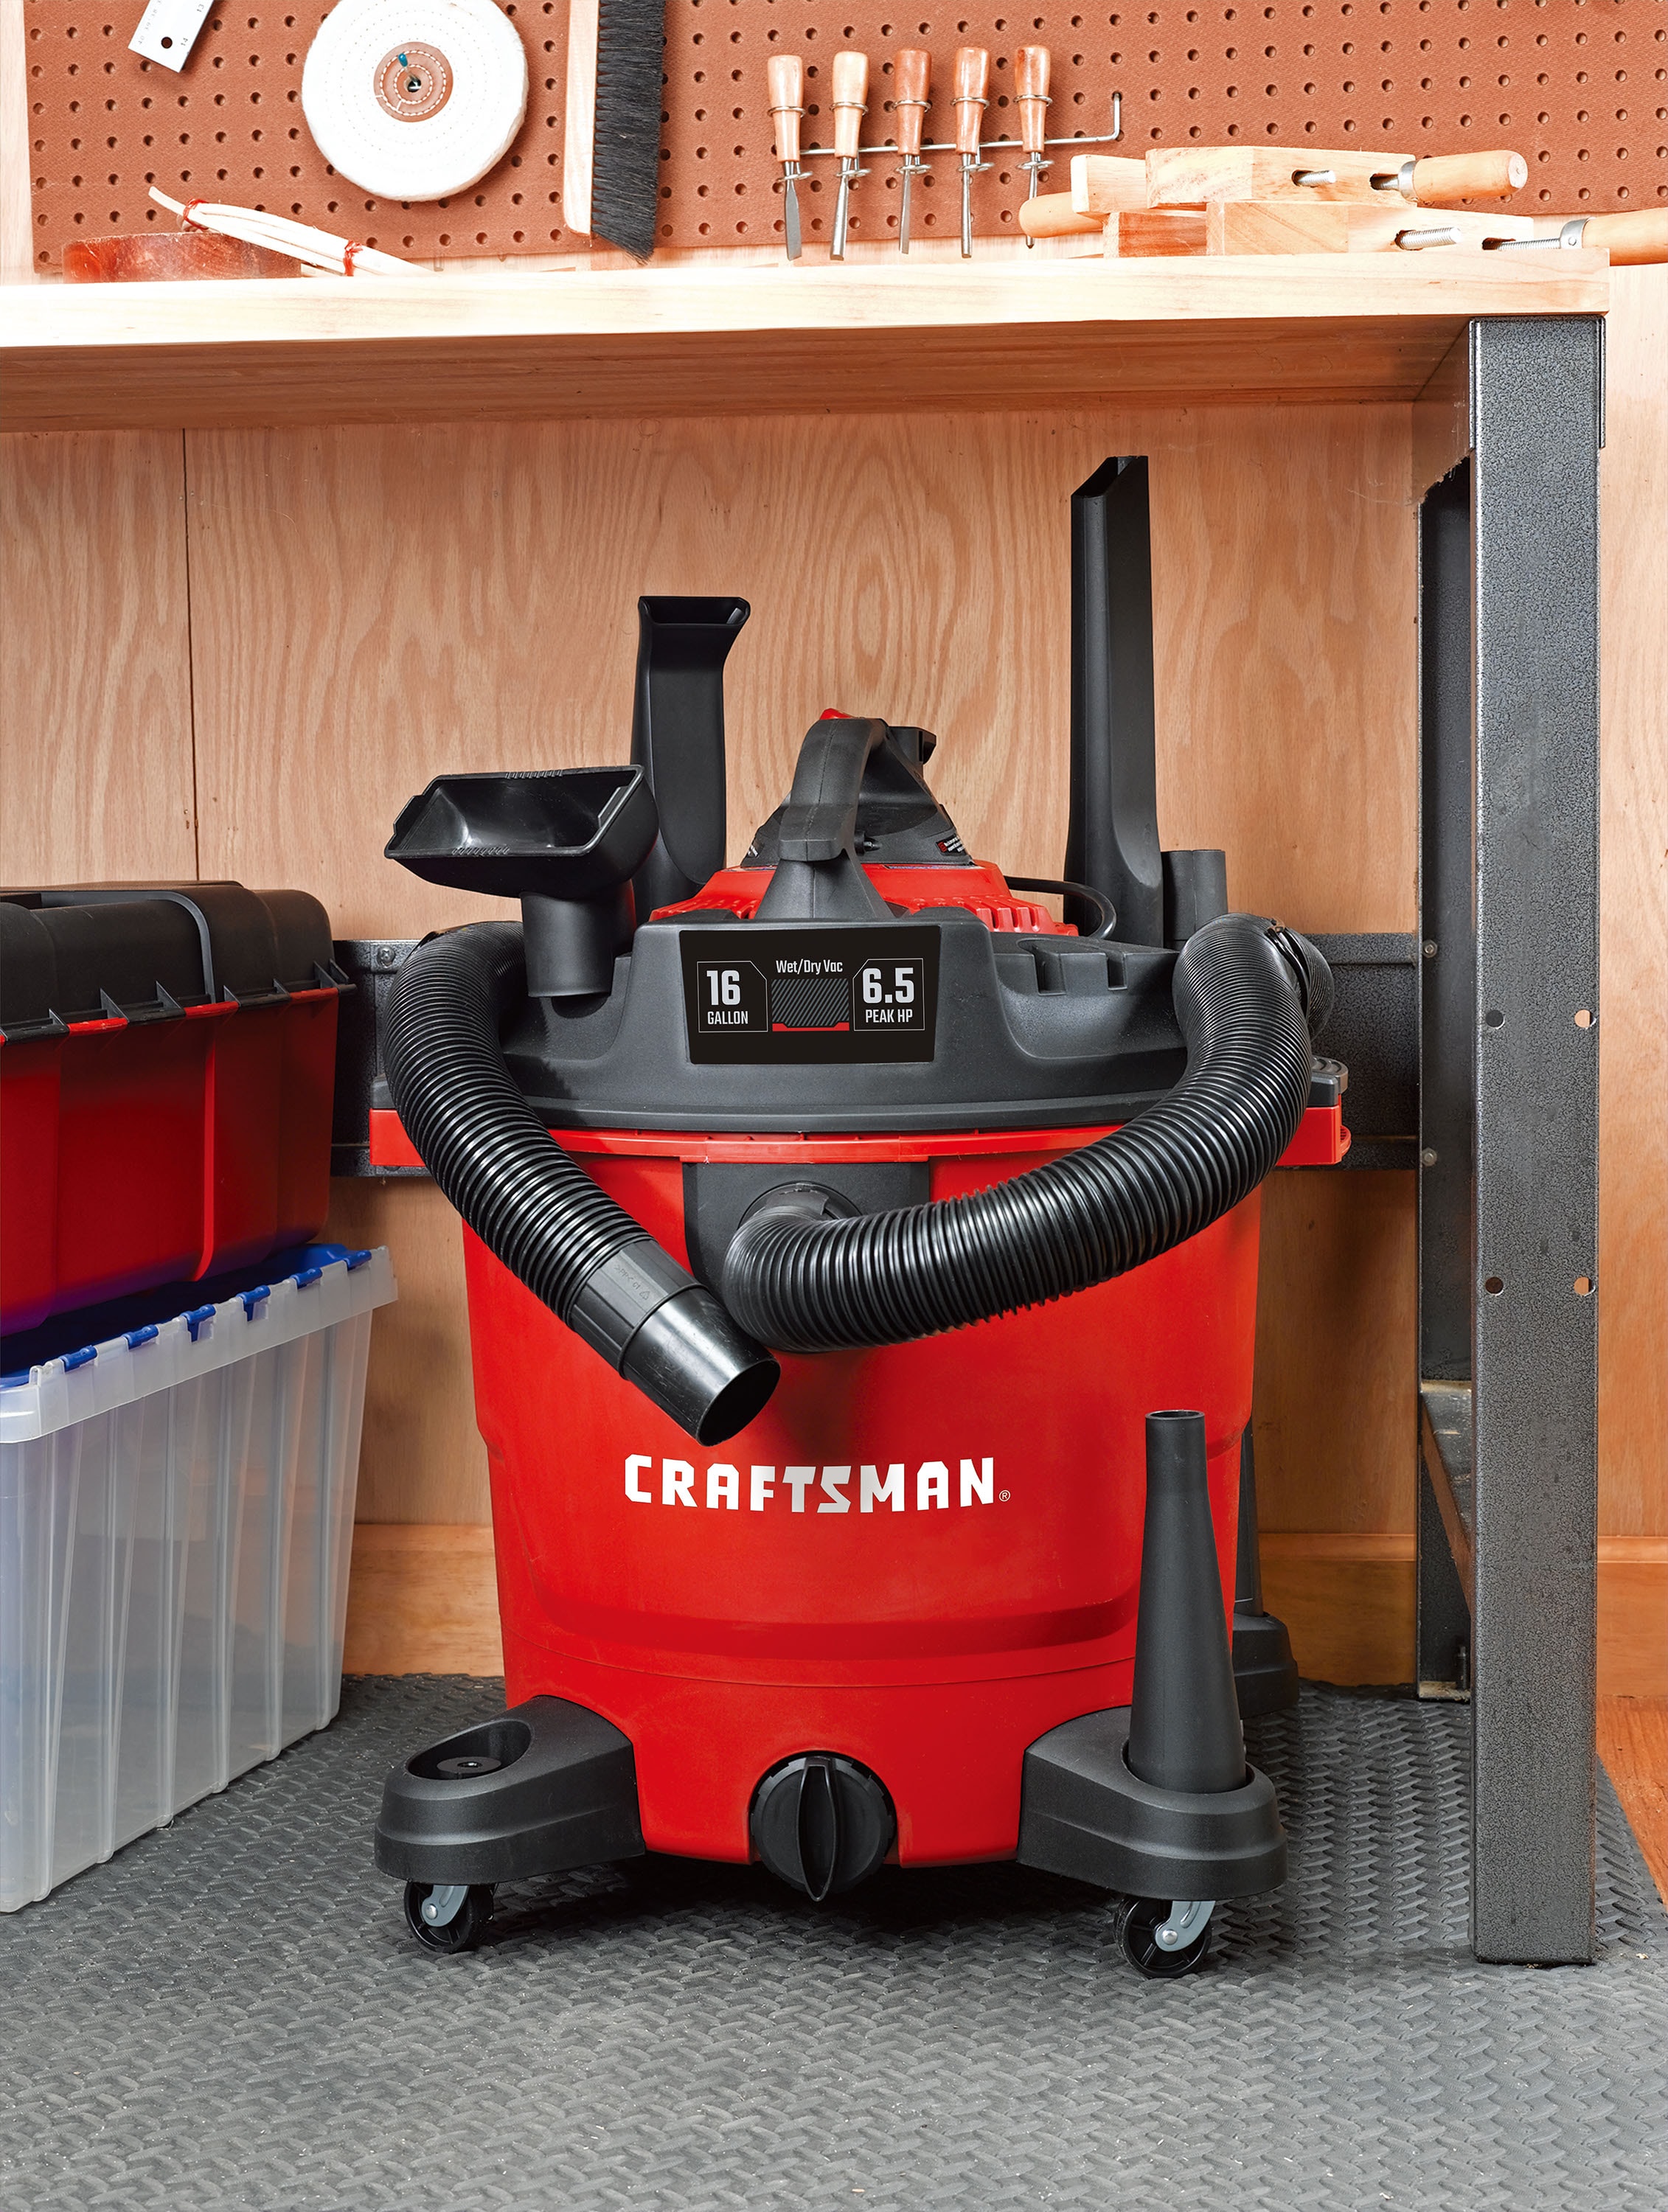 Craftsman 16 Gallons 65 Hp Corded Wetdry Shop Vacuum With Accessories Included In The Shop